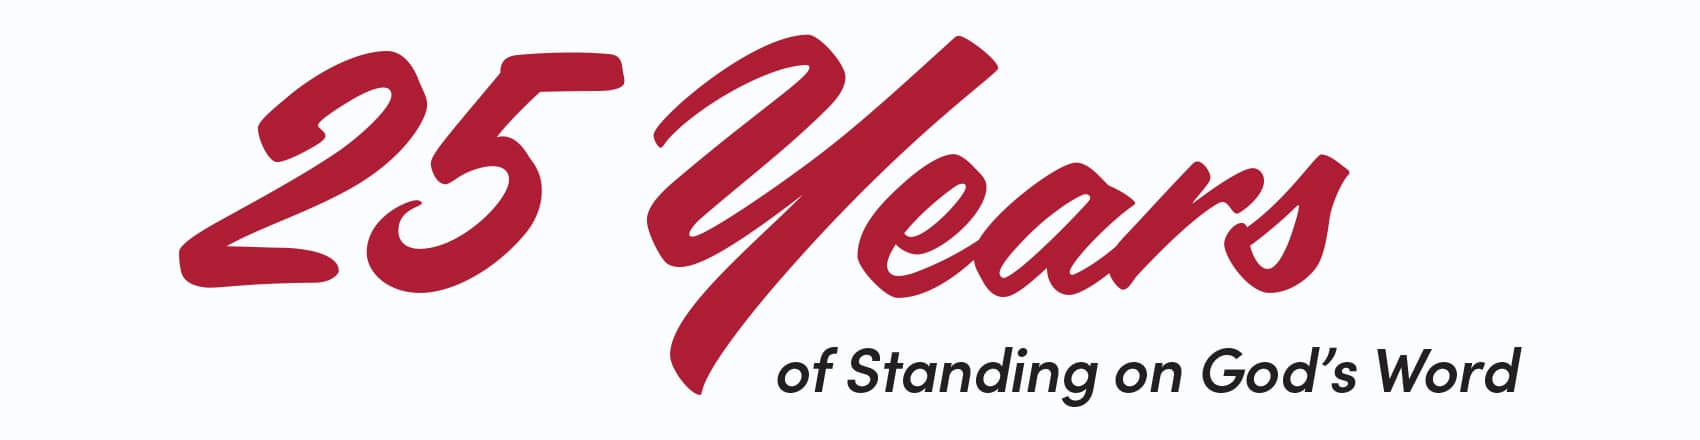 25 Years of Standing on God's Word